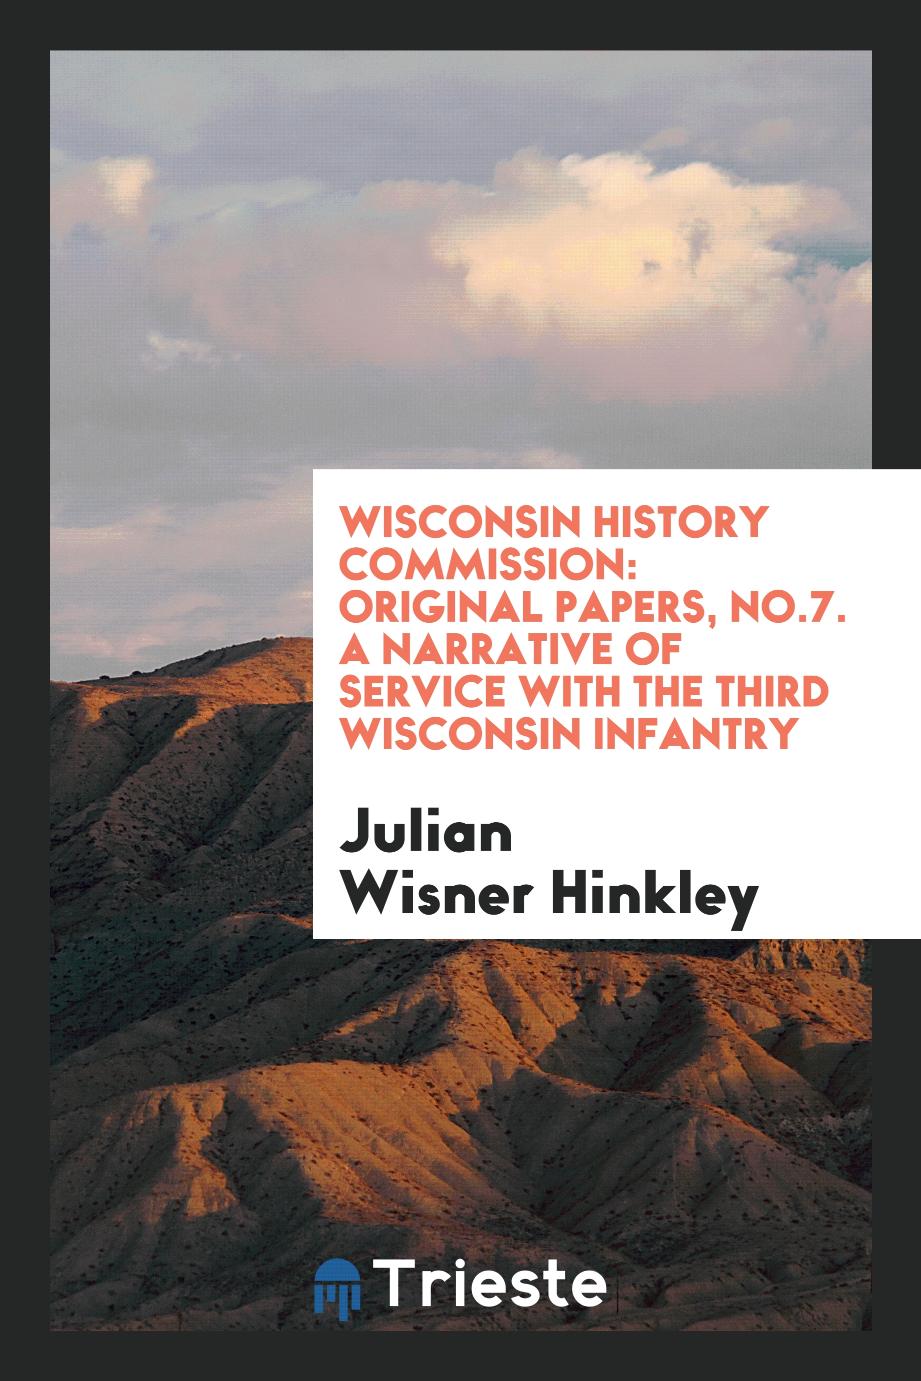 Wisconsin History Commission: Original Papers, No.7. A narrative of service with the Third Wisconsin Infantry